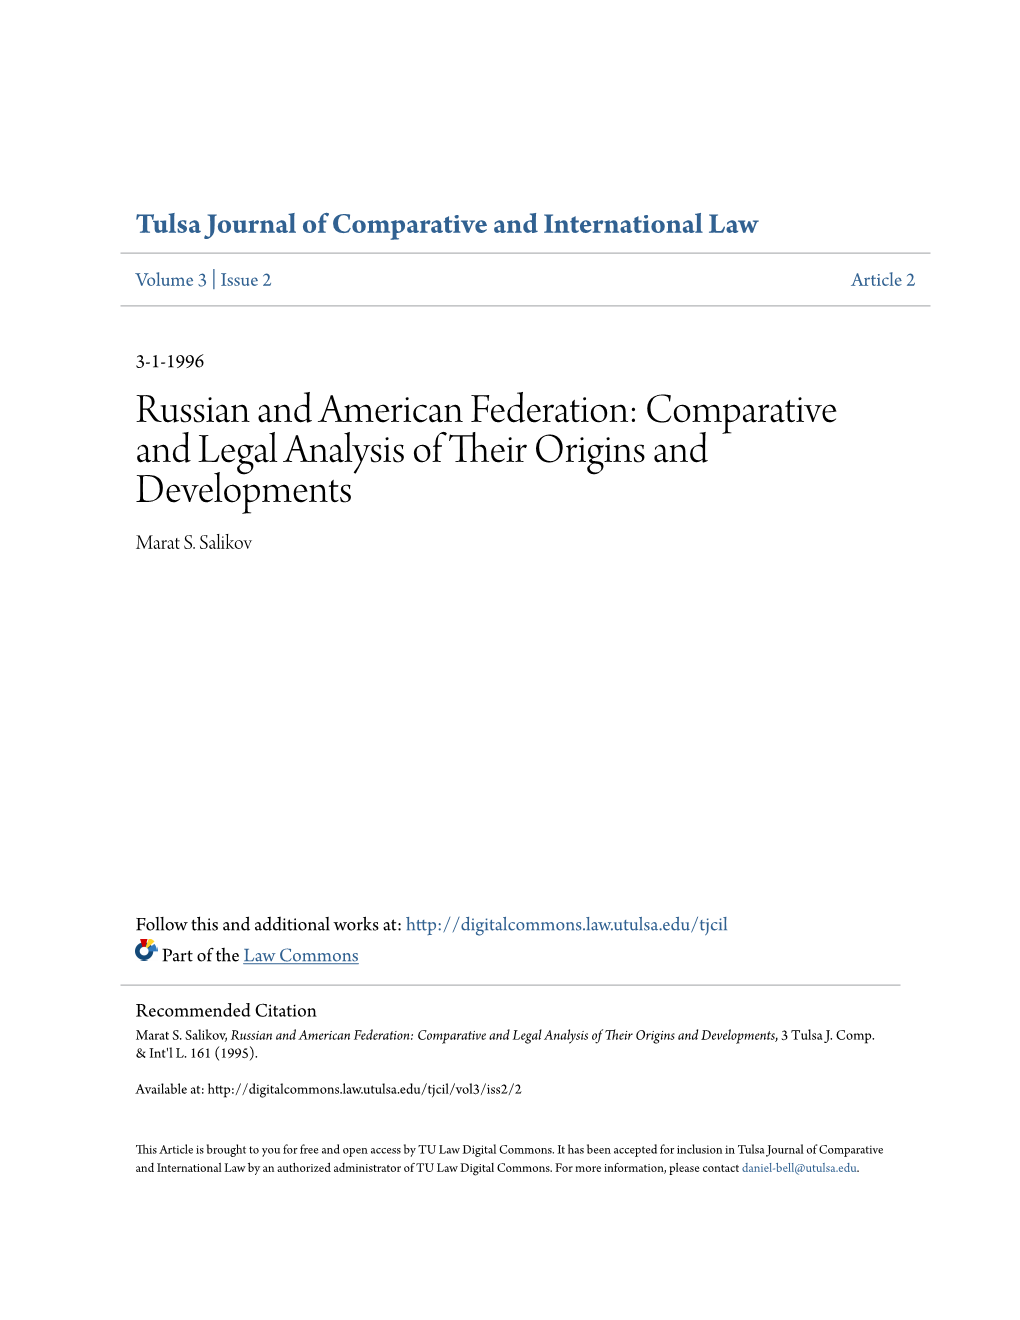 Russian and American Federation: Comparative and Legal Analysis of Their Origins and Developments Marat S